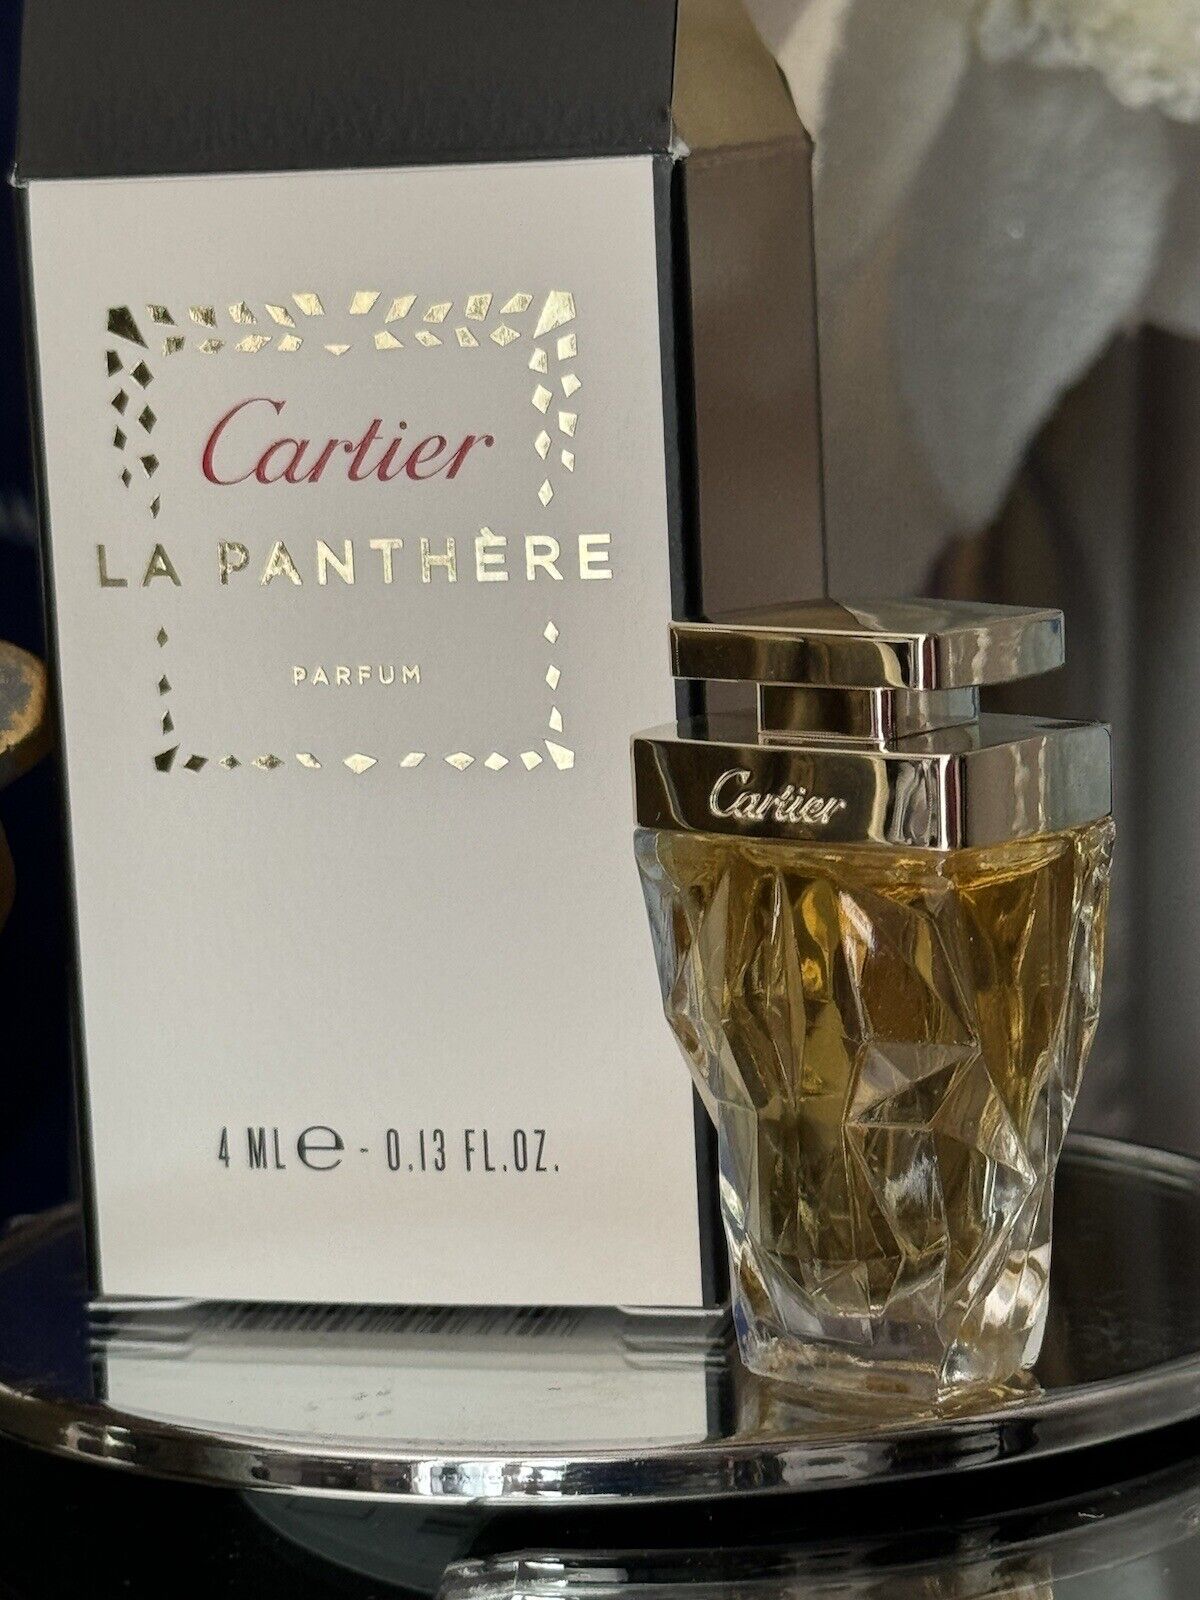 MINIATURE CARTIER  LA PANTHER  LE PERFUME EXTRACT RARE